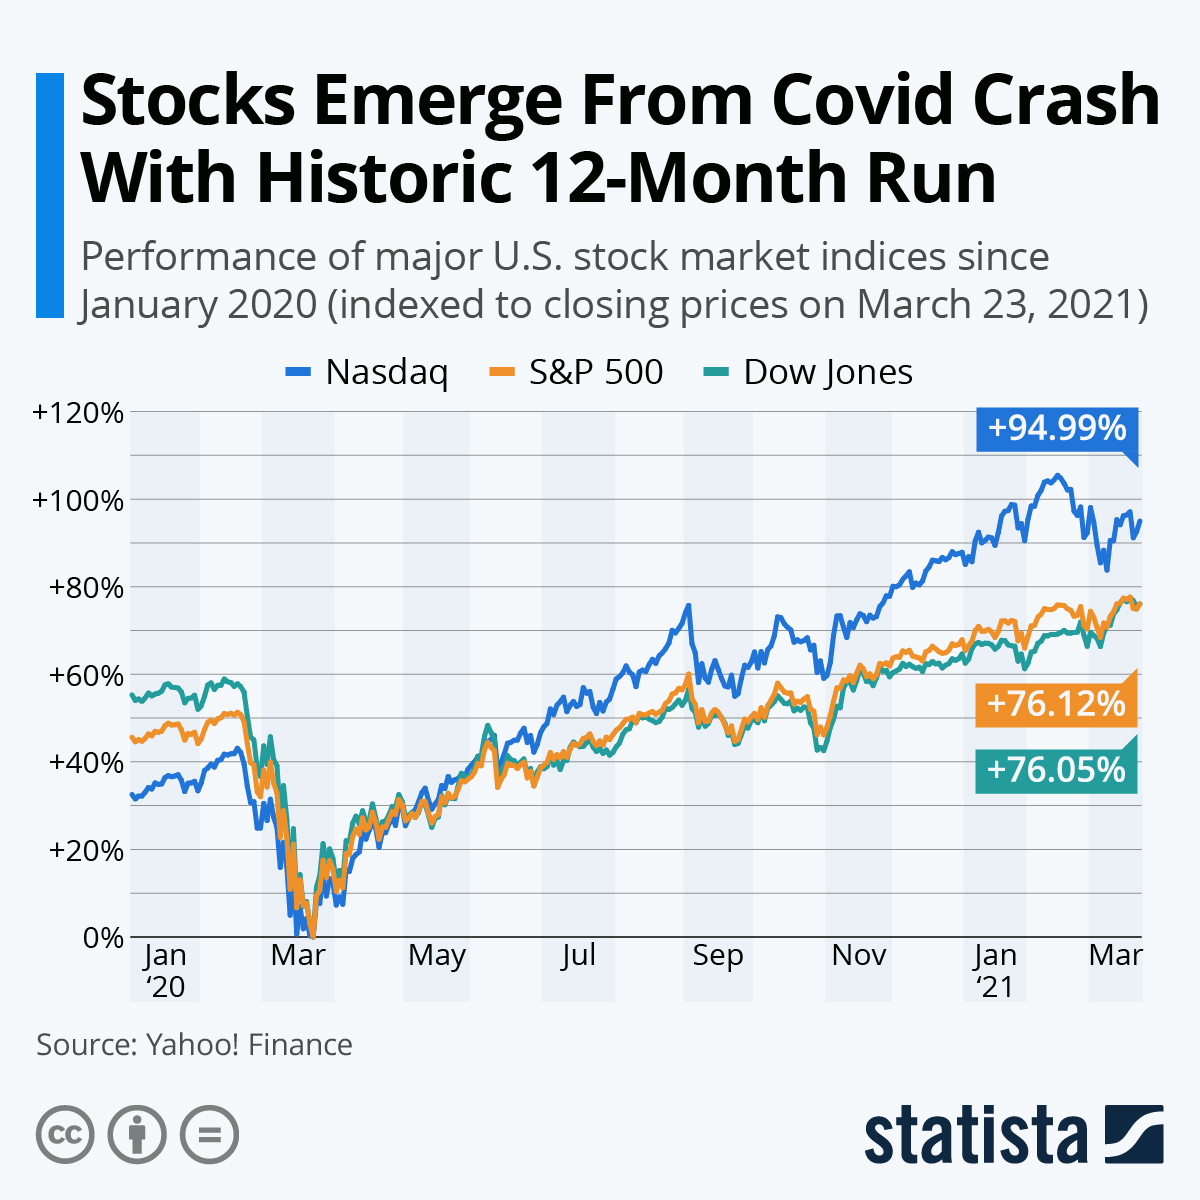 Stocks Emerge From Covid Crash With Historic 12-Month Run